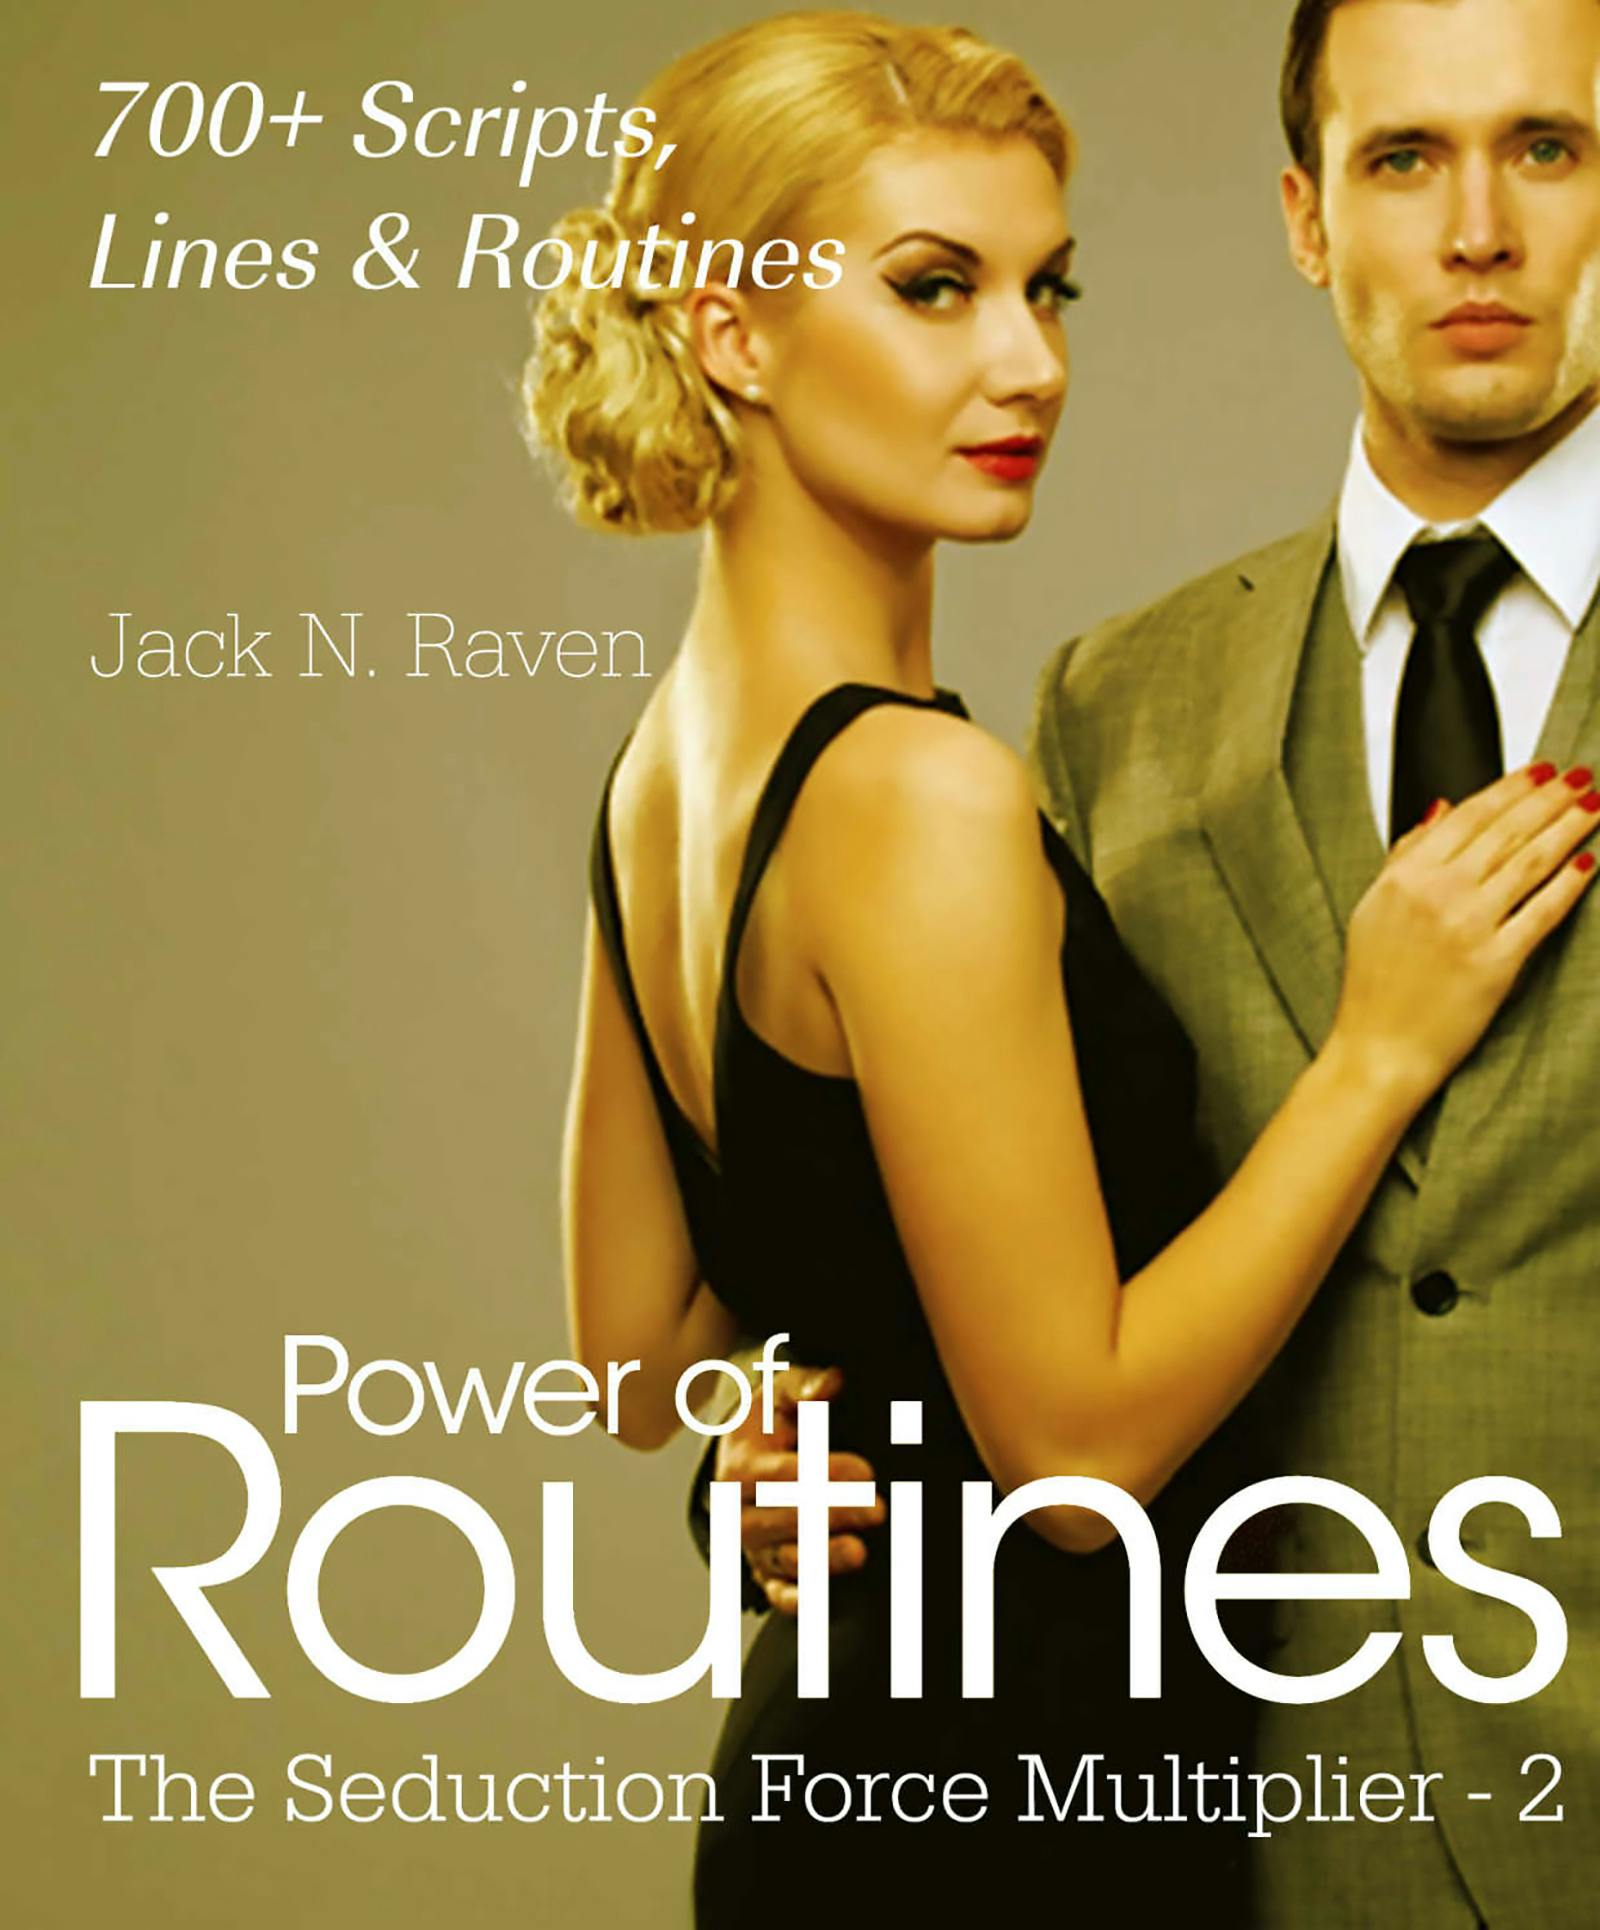 Seduction Force Multiplier 2: Power of Routines - Over 700 Scripts, Lines and Routines - Jack N. Raven